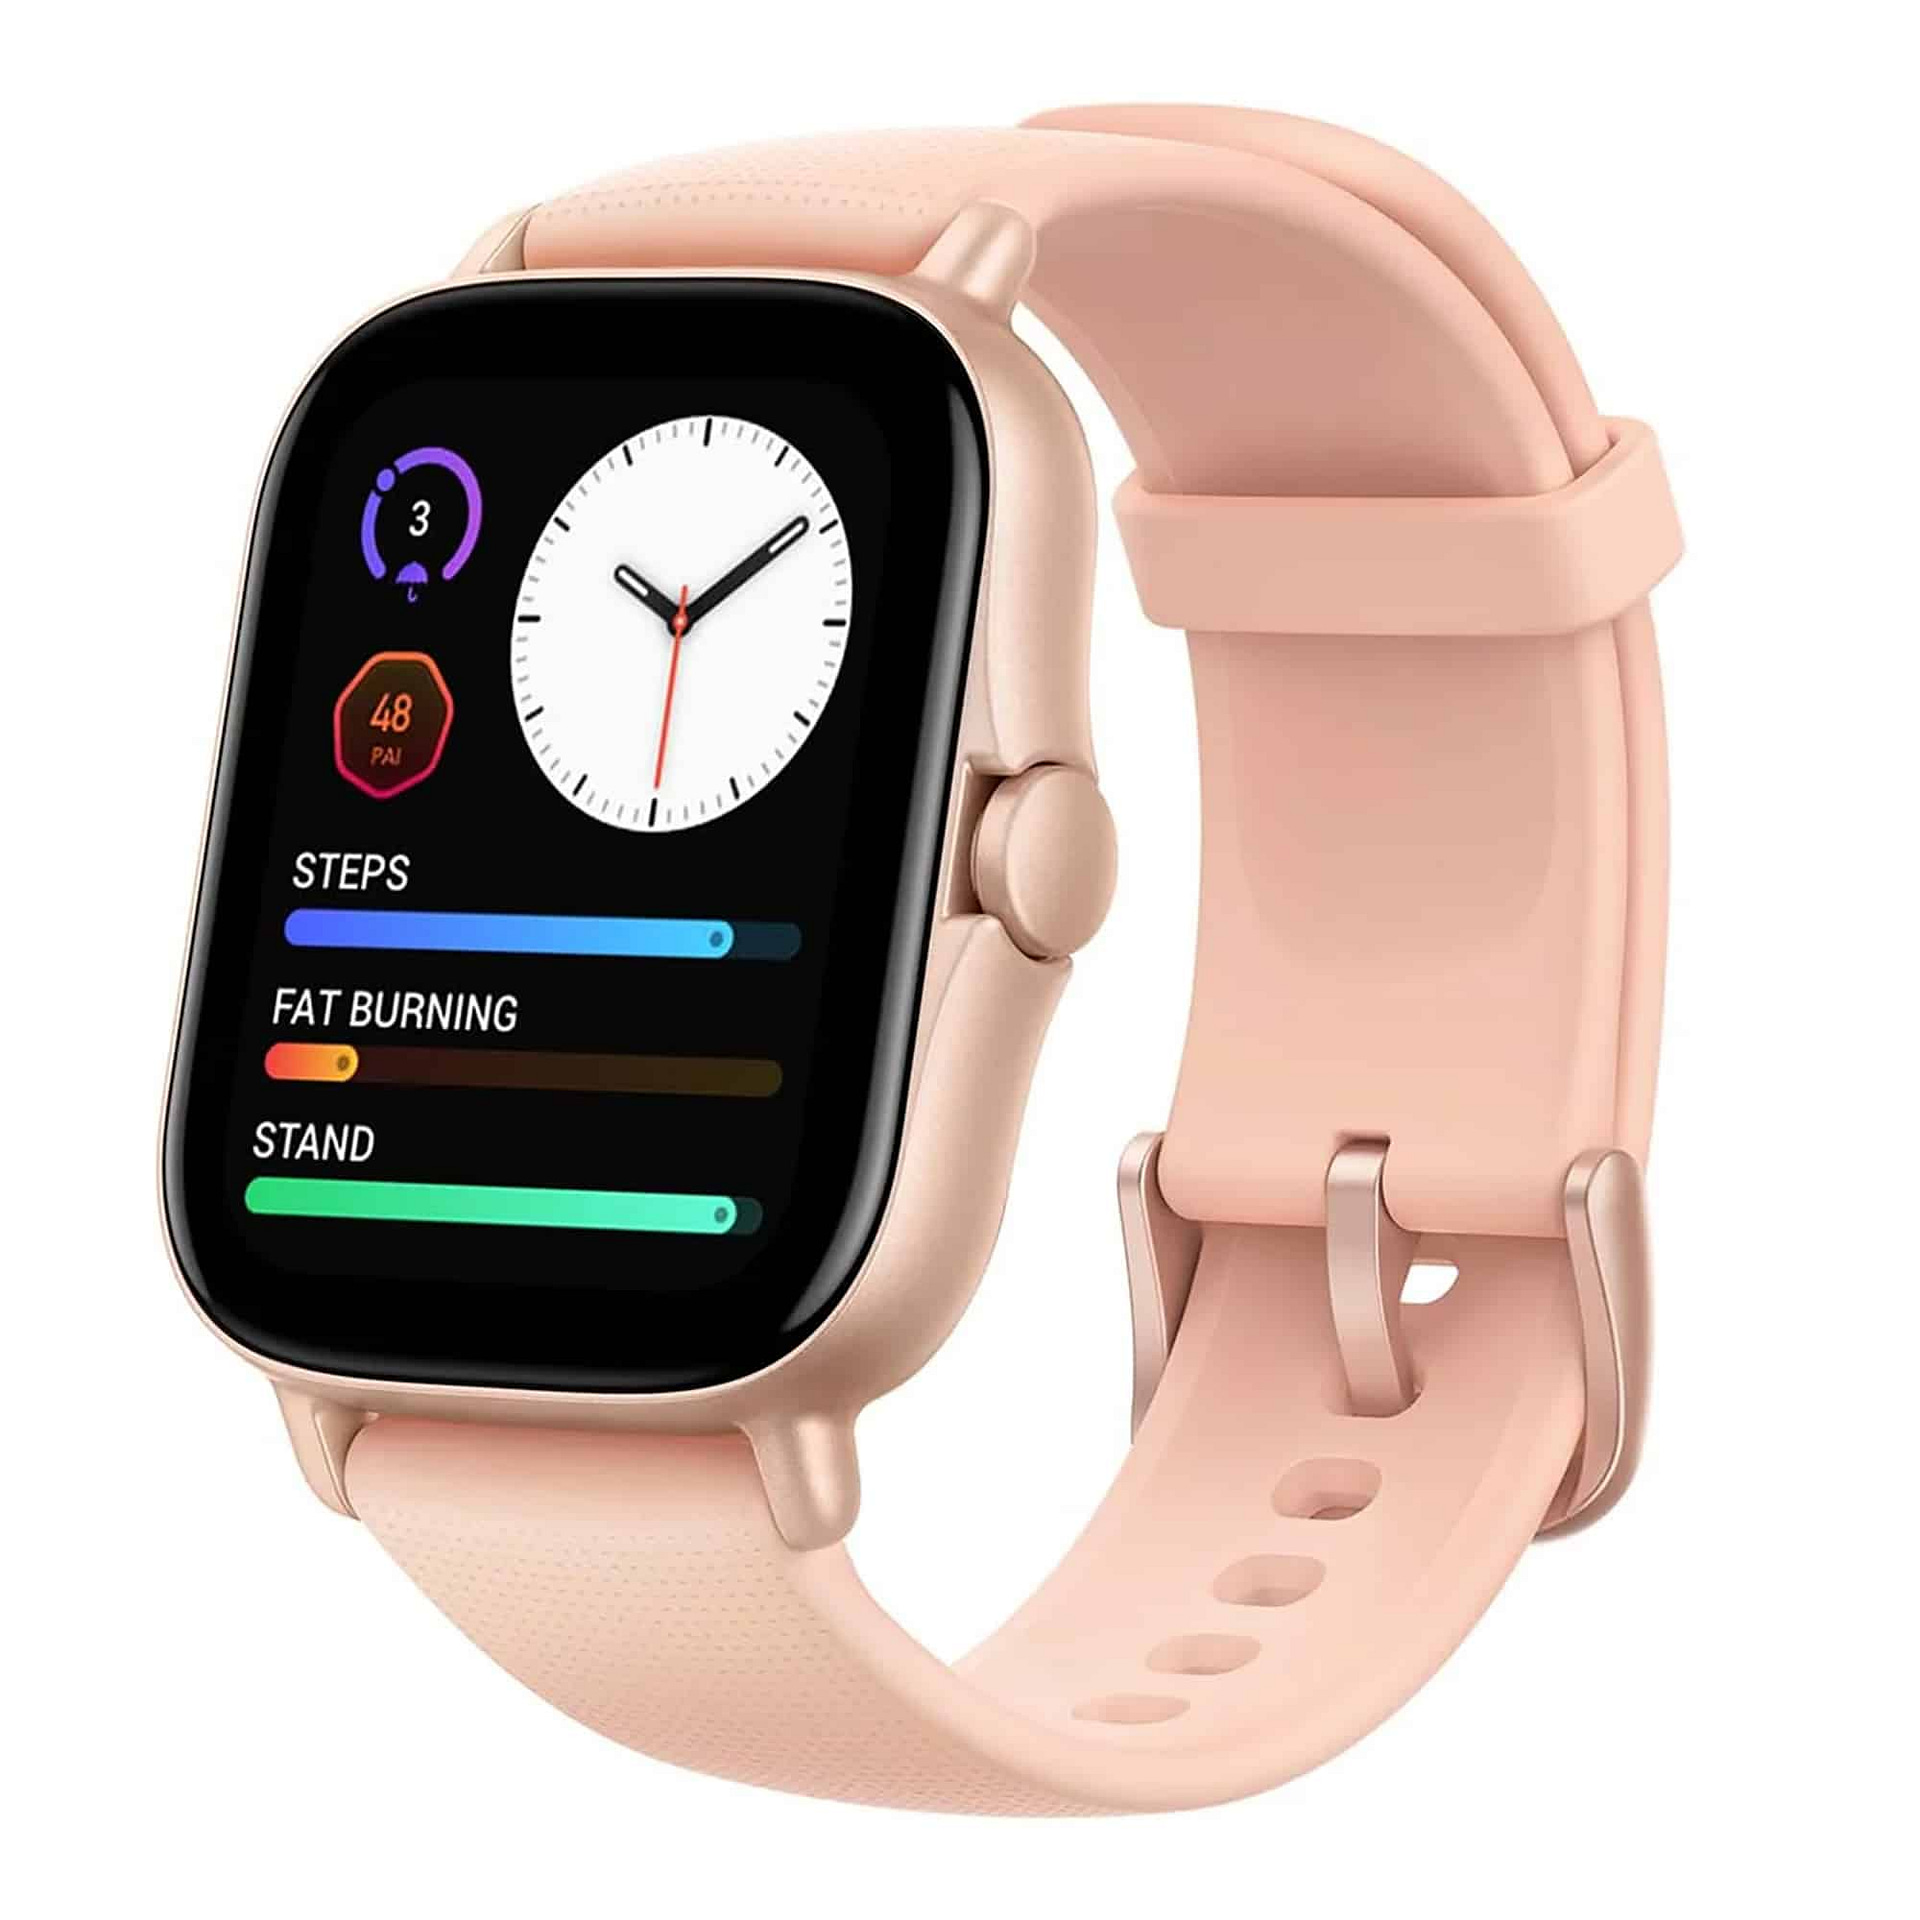 Reloj inteligente Amazfit GTS 2 para mujer, Android y iPhone